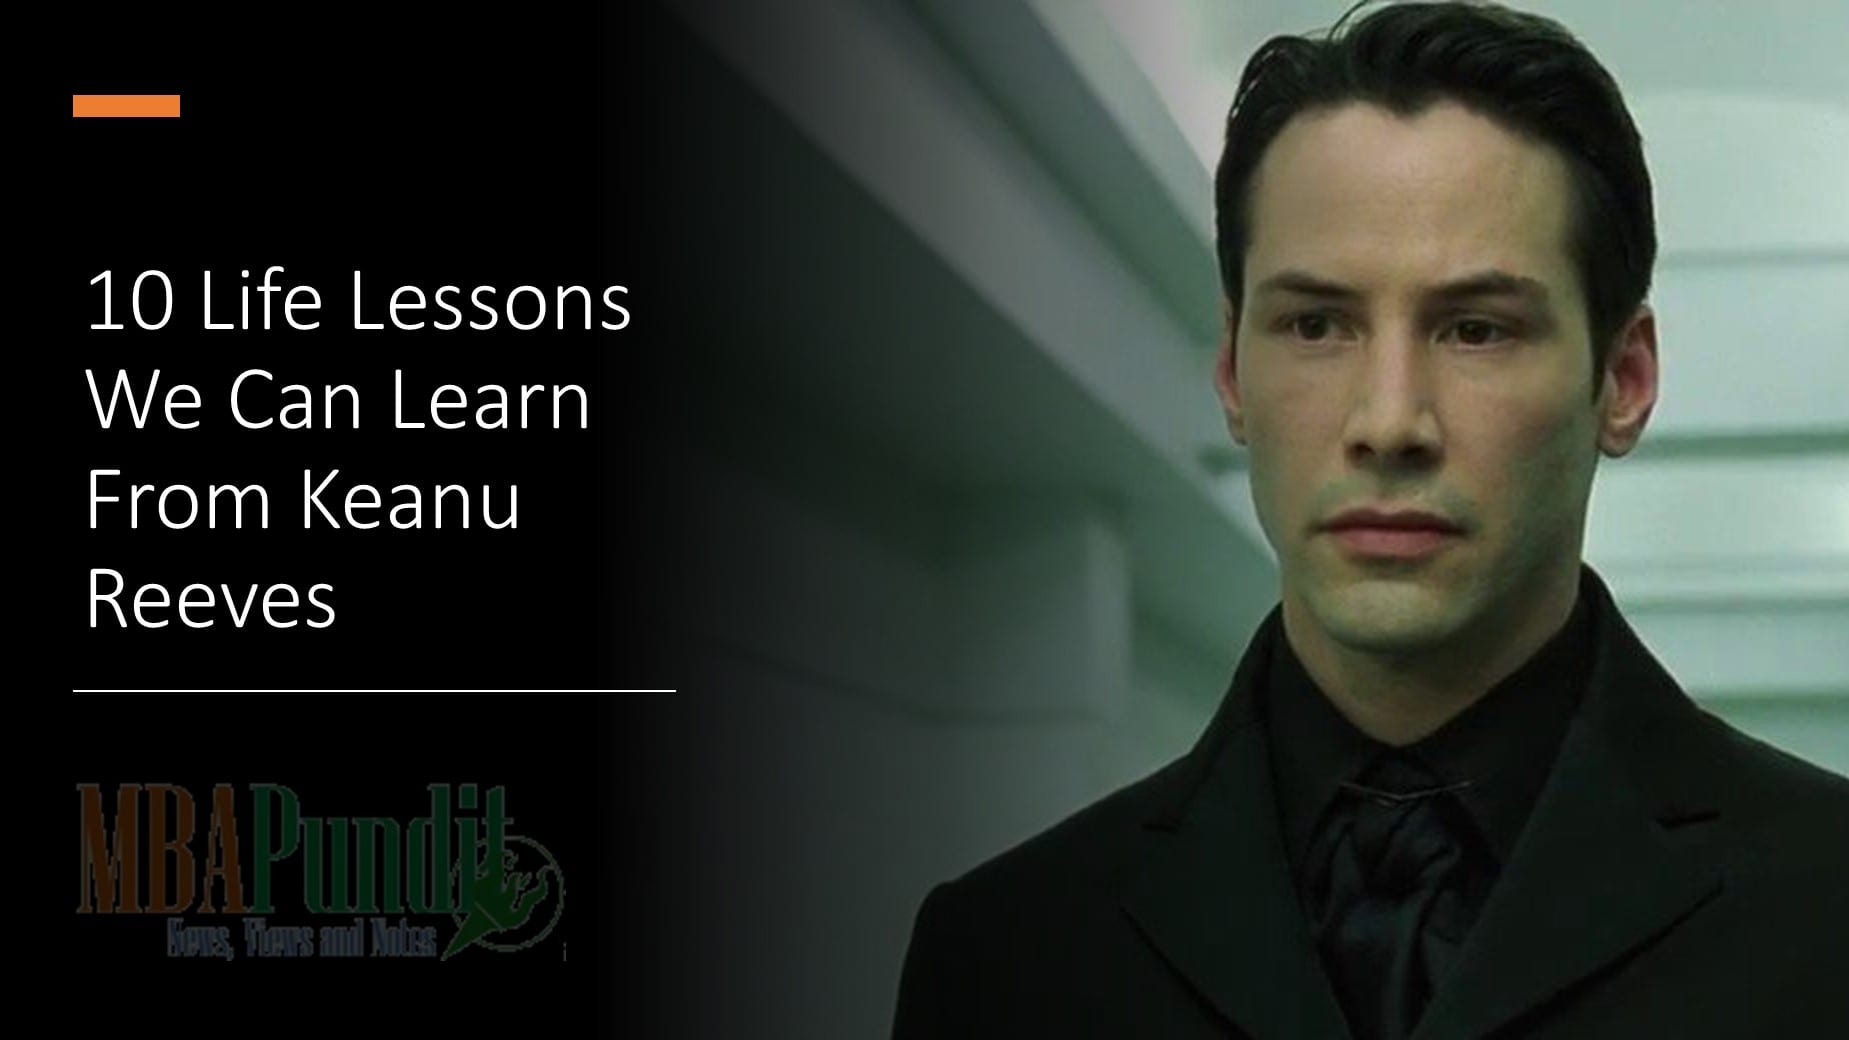 10 Life Lessons We Can Learn From Keanu Reeves